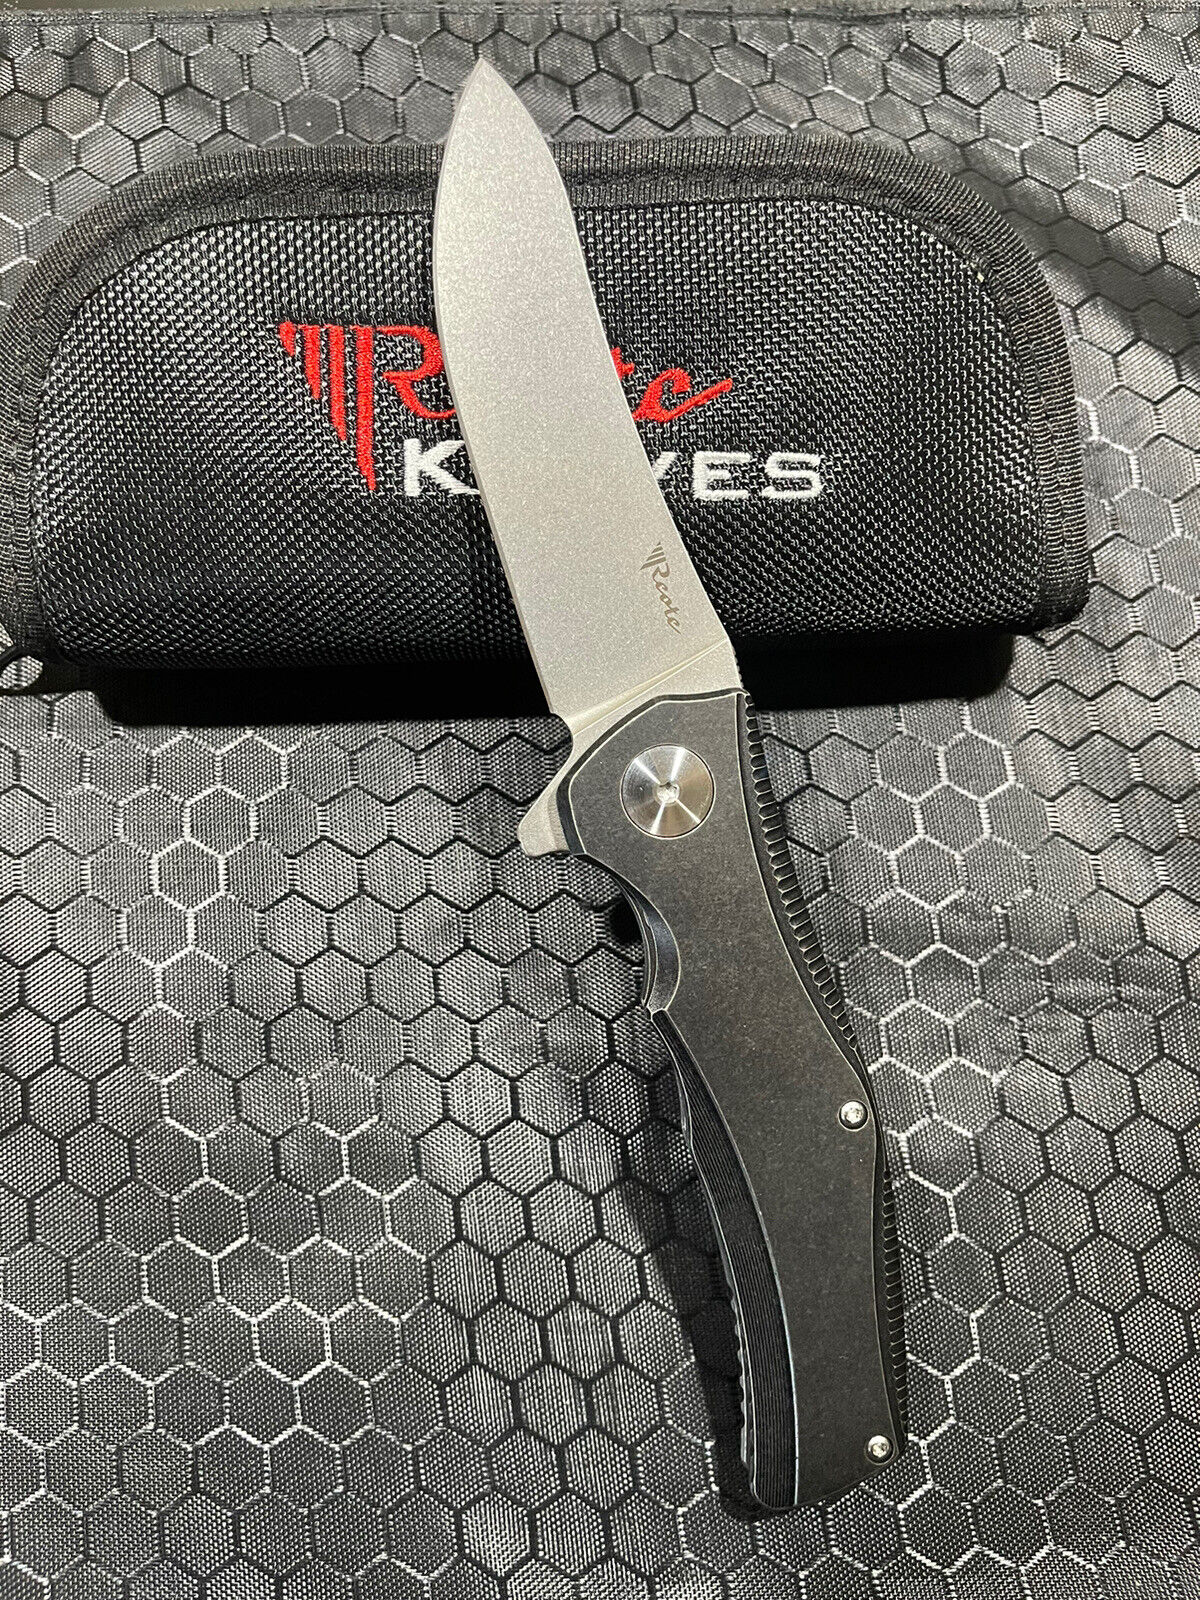 Reate Knives Hills. Titanium Scales And Clip. S35VN Blade. Discontinued.